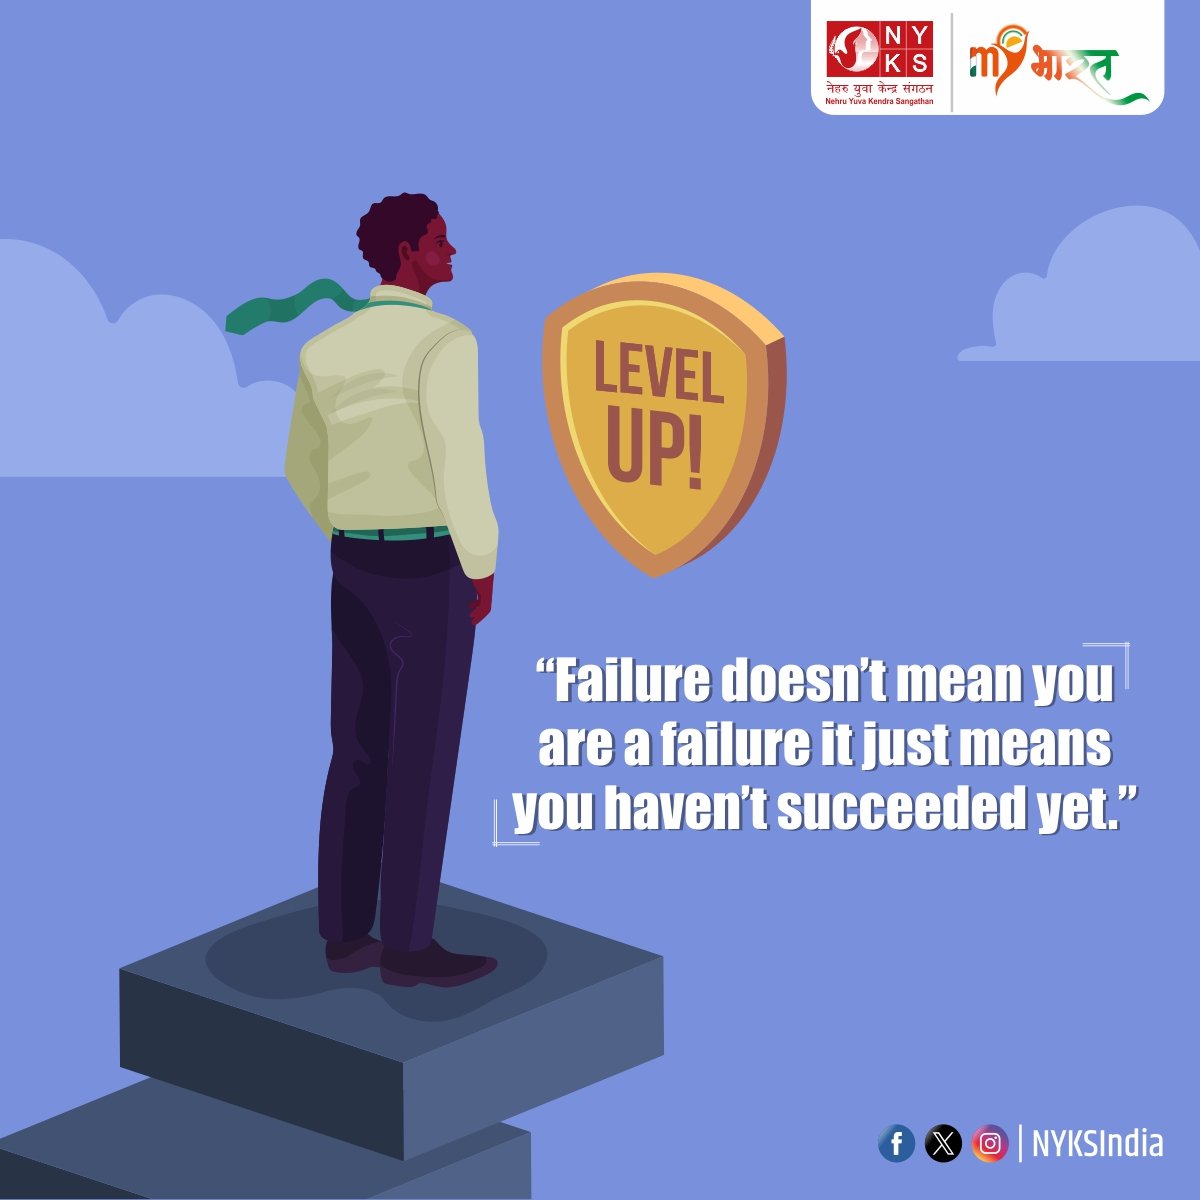 Quote of the Day! Failure isn't the end; it's just a step towards success. Keep pushing forward! #KeepGoing #SuccessMindset #Motivation #NYKS